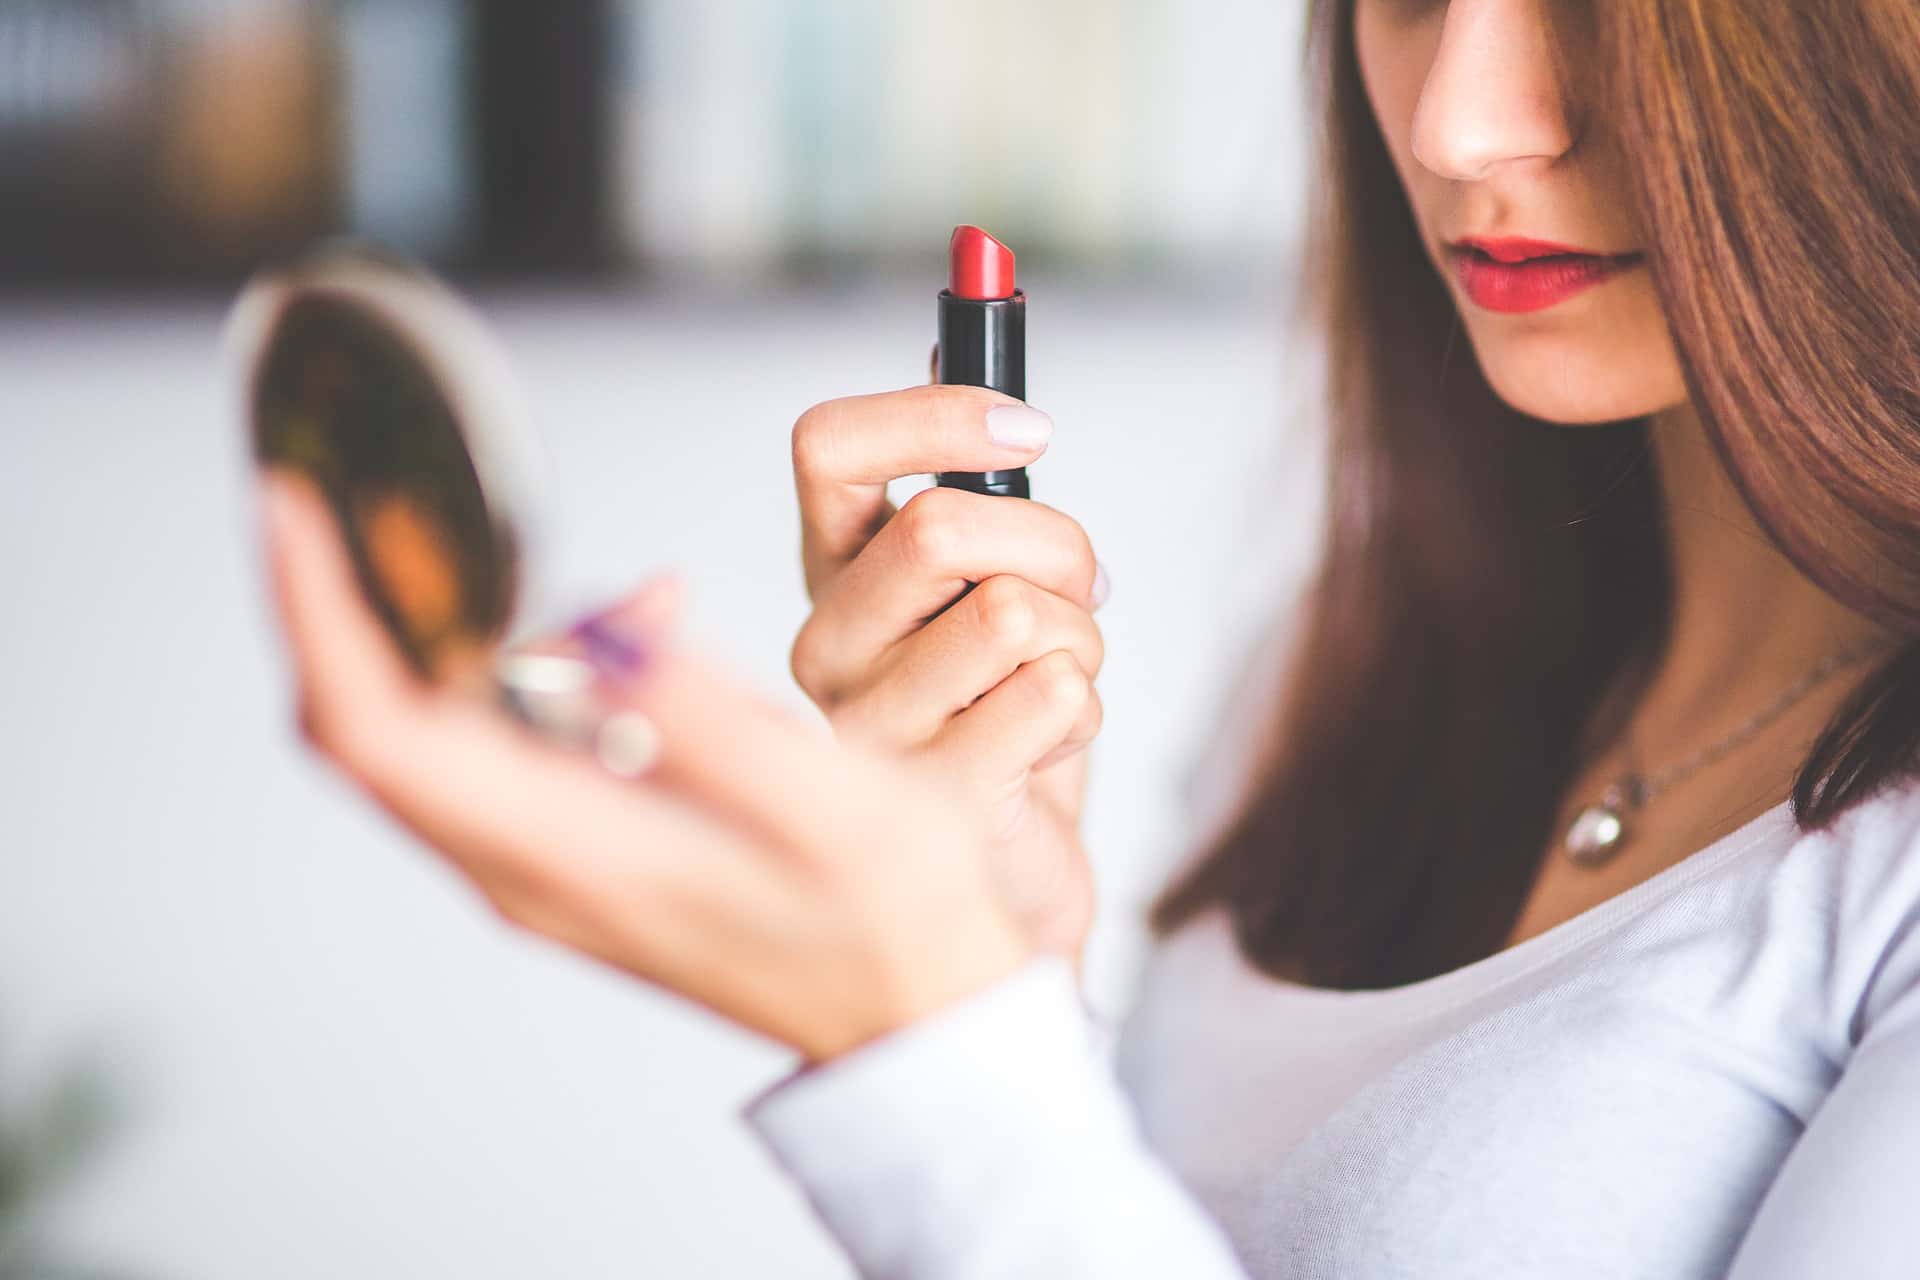 How to get the perfect smile - invest in luxury lipsticks